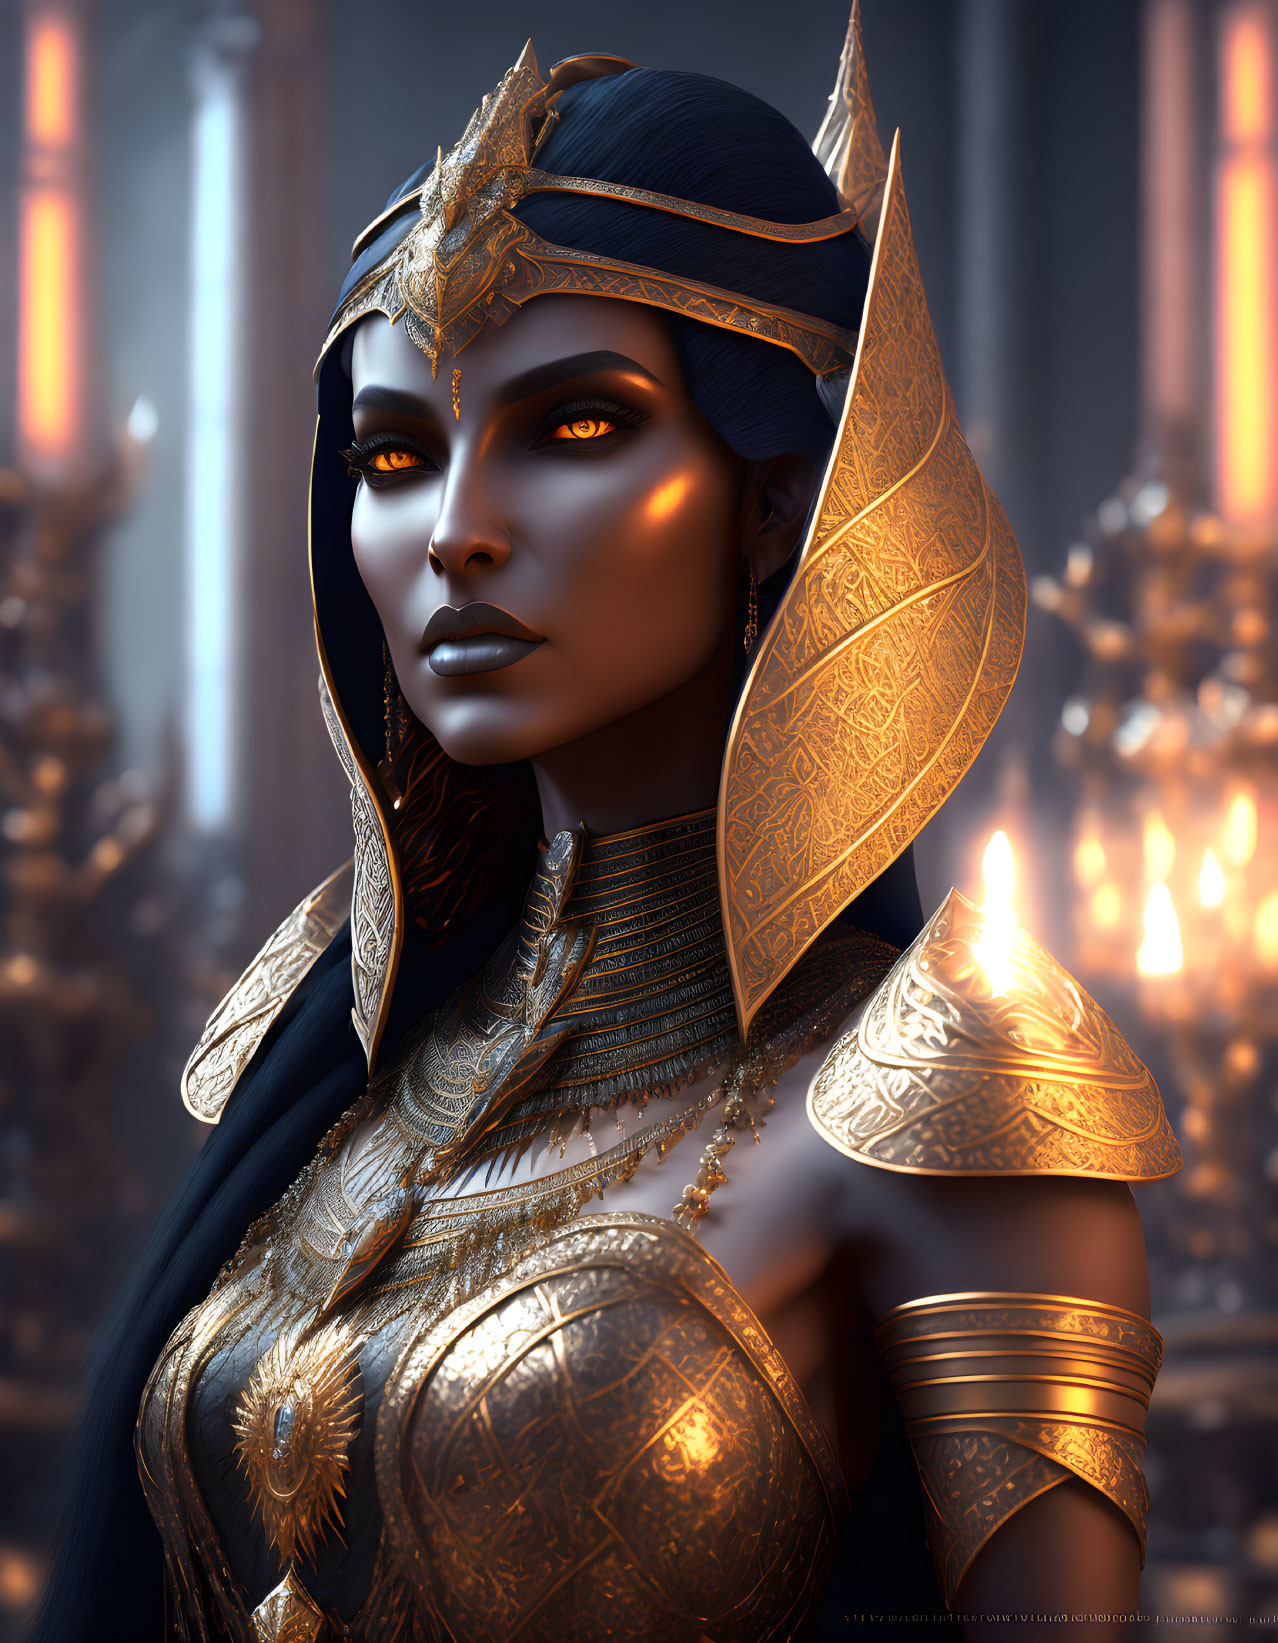 Regal woman in golden armor with intricate designs against fiery backdrop